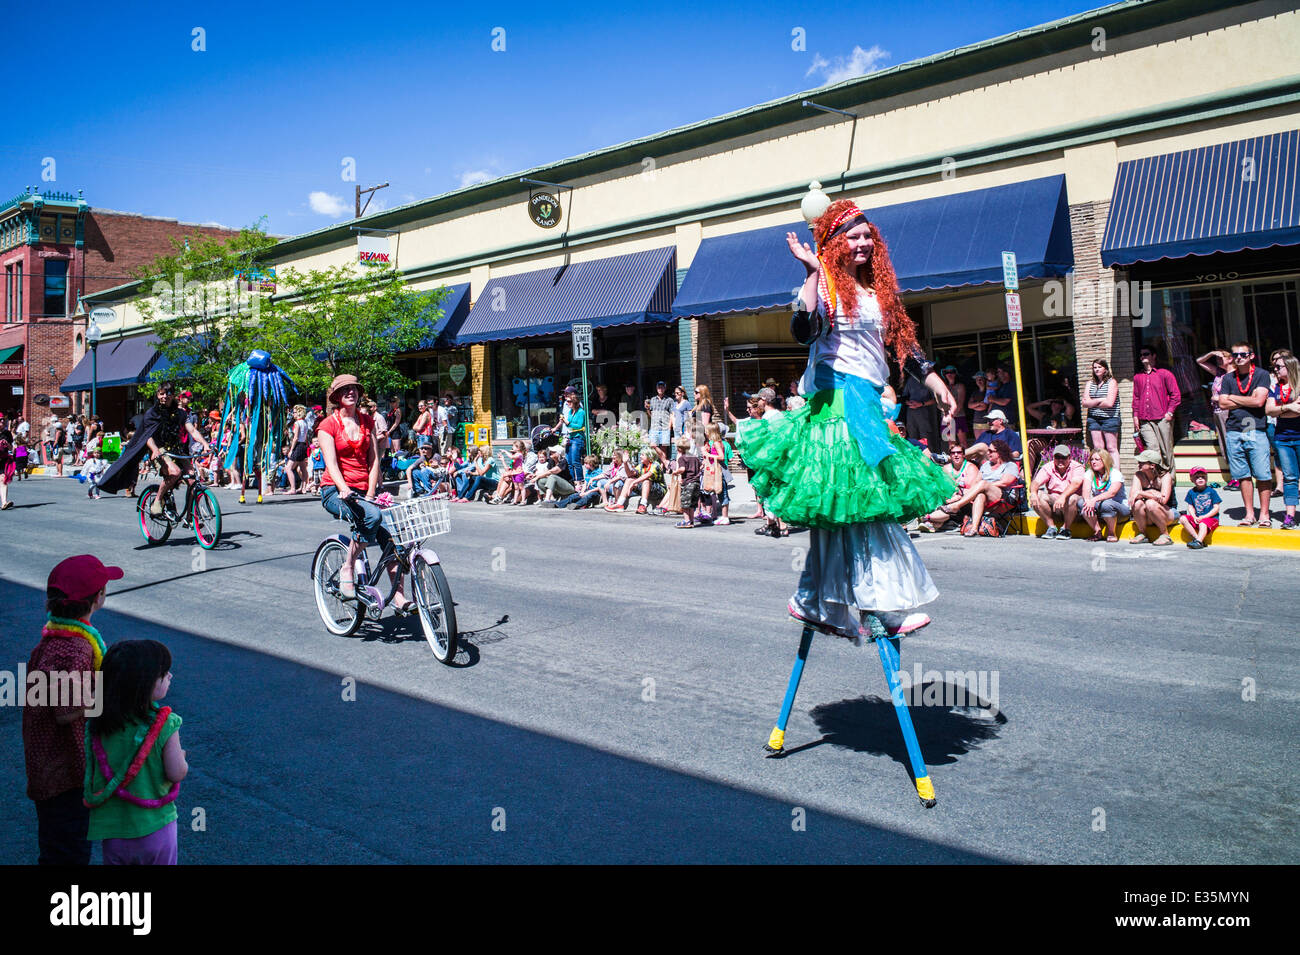 Circus performers on stilts in Annual FIBark Parade in small mountain town of Salida, Colorado, USA Stock Photo